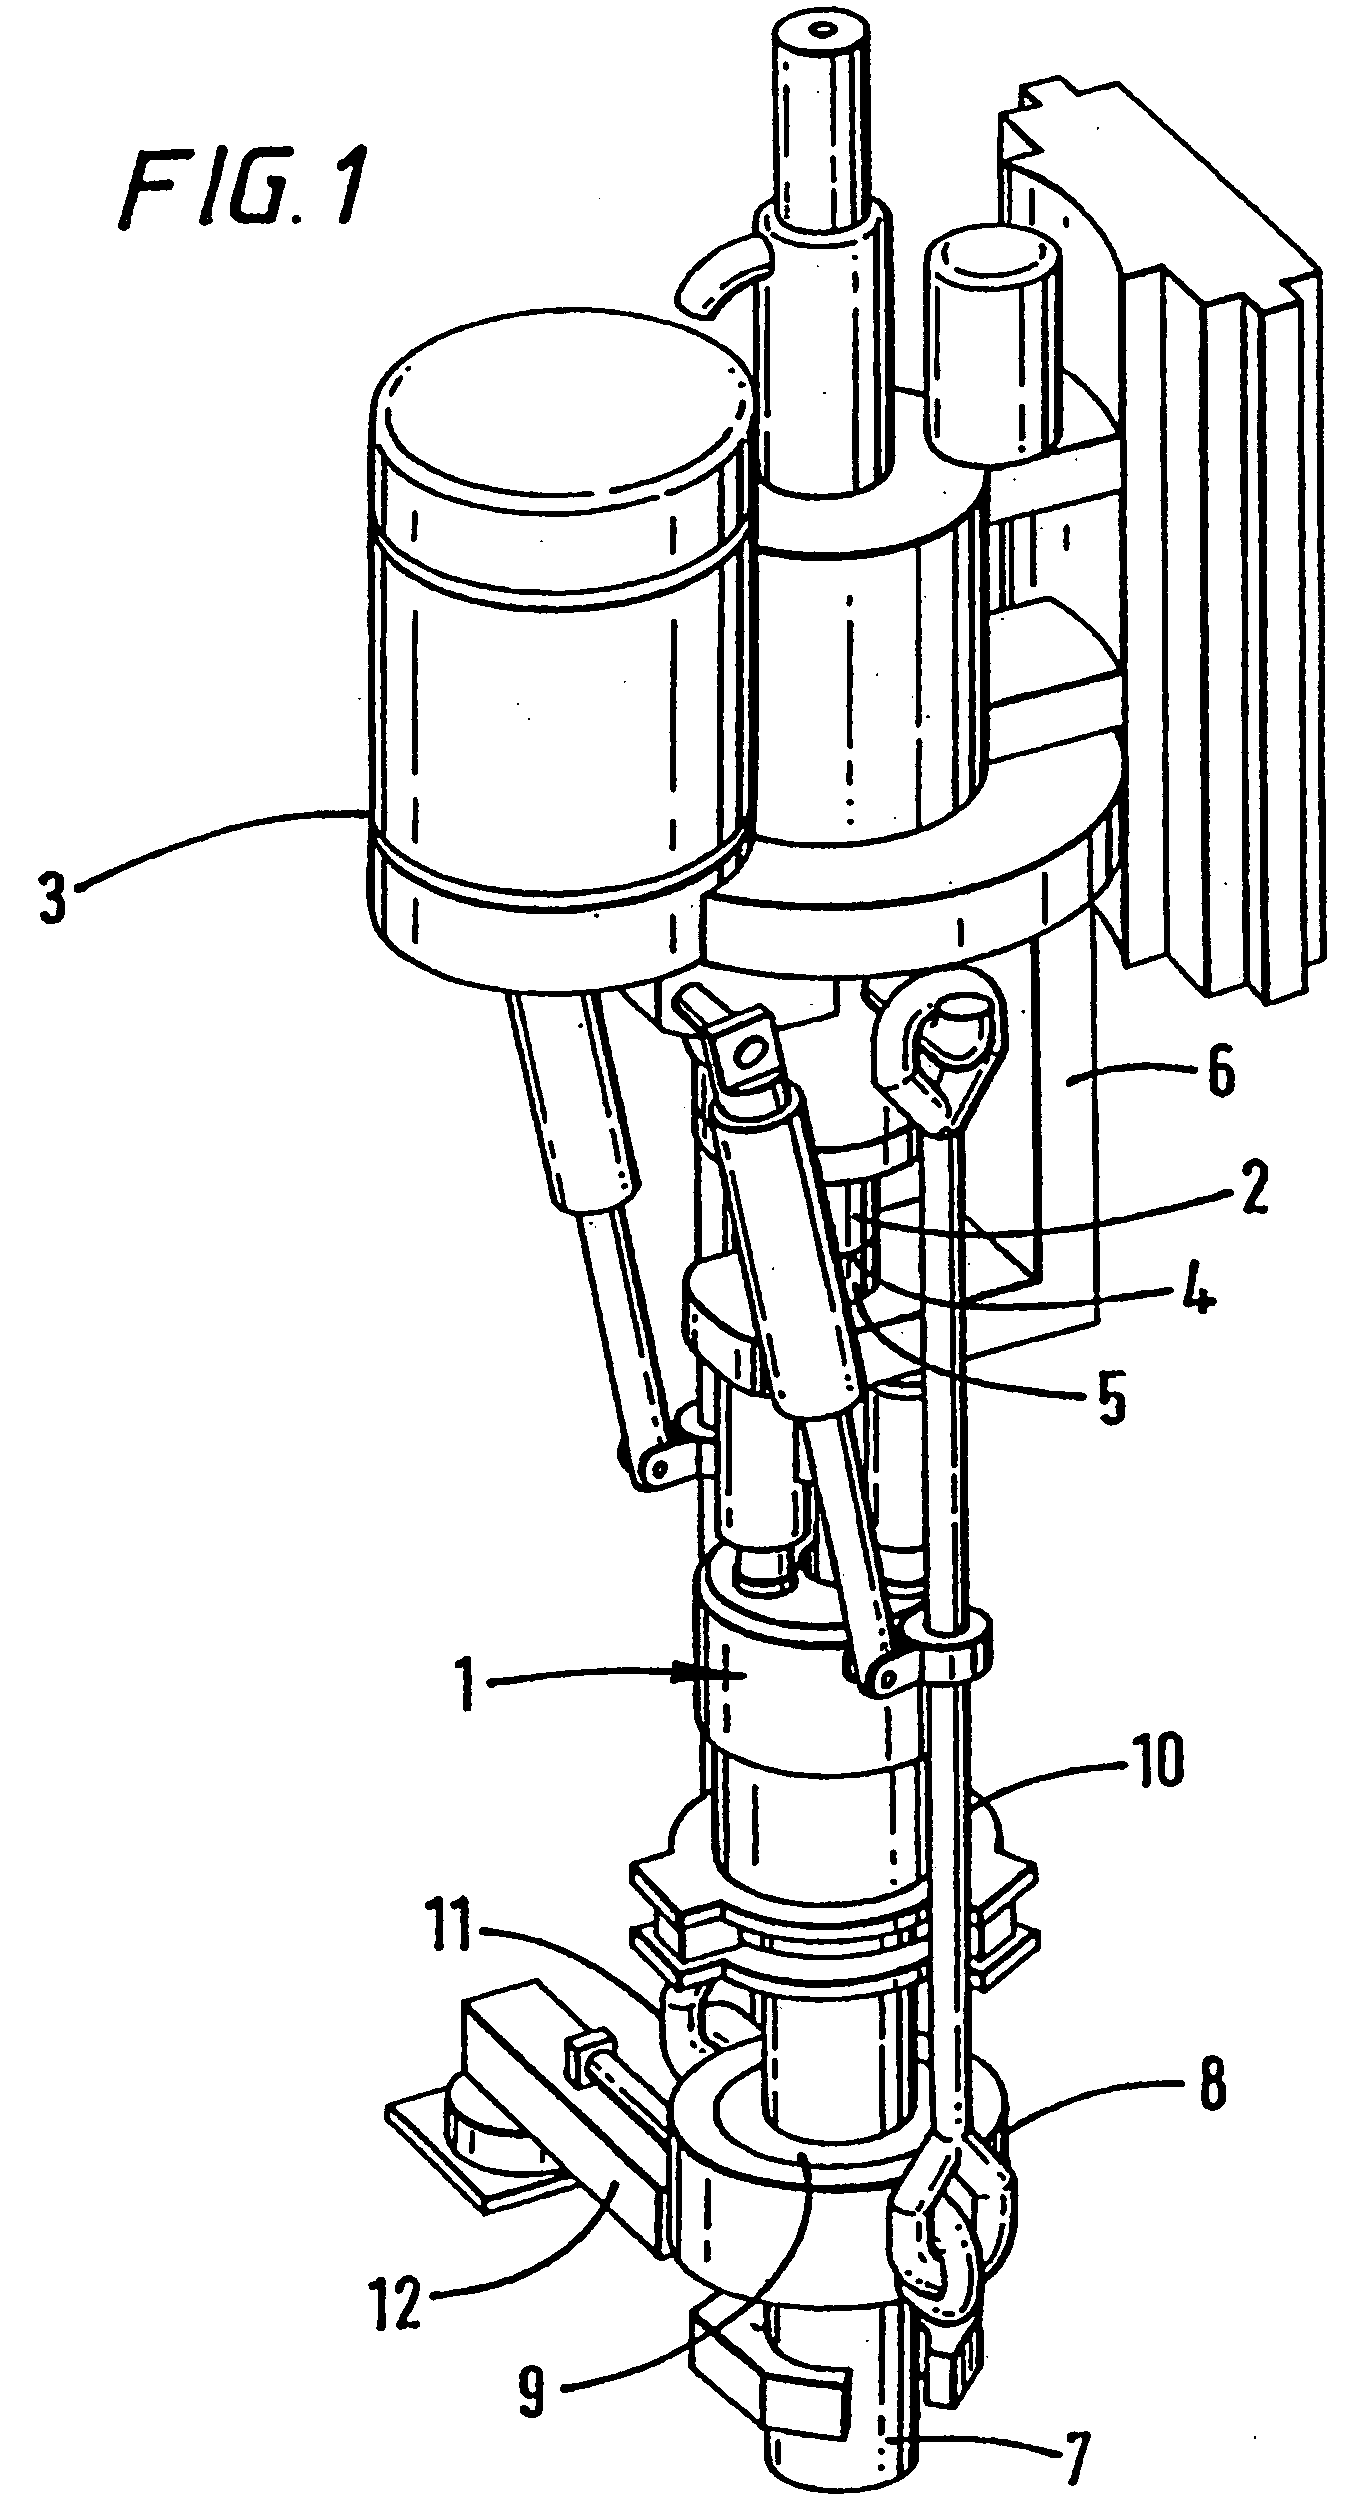 Apparatus and method for facilitating the connection of tubulars using a top drive